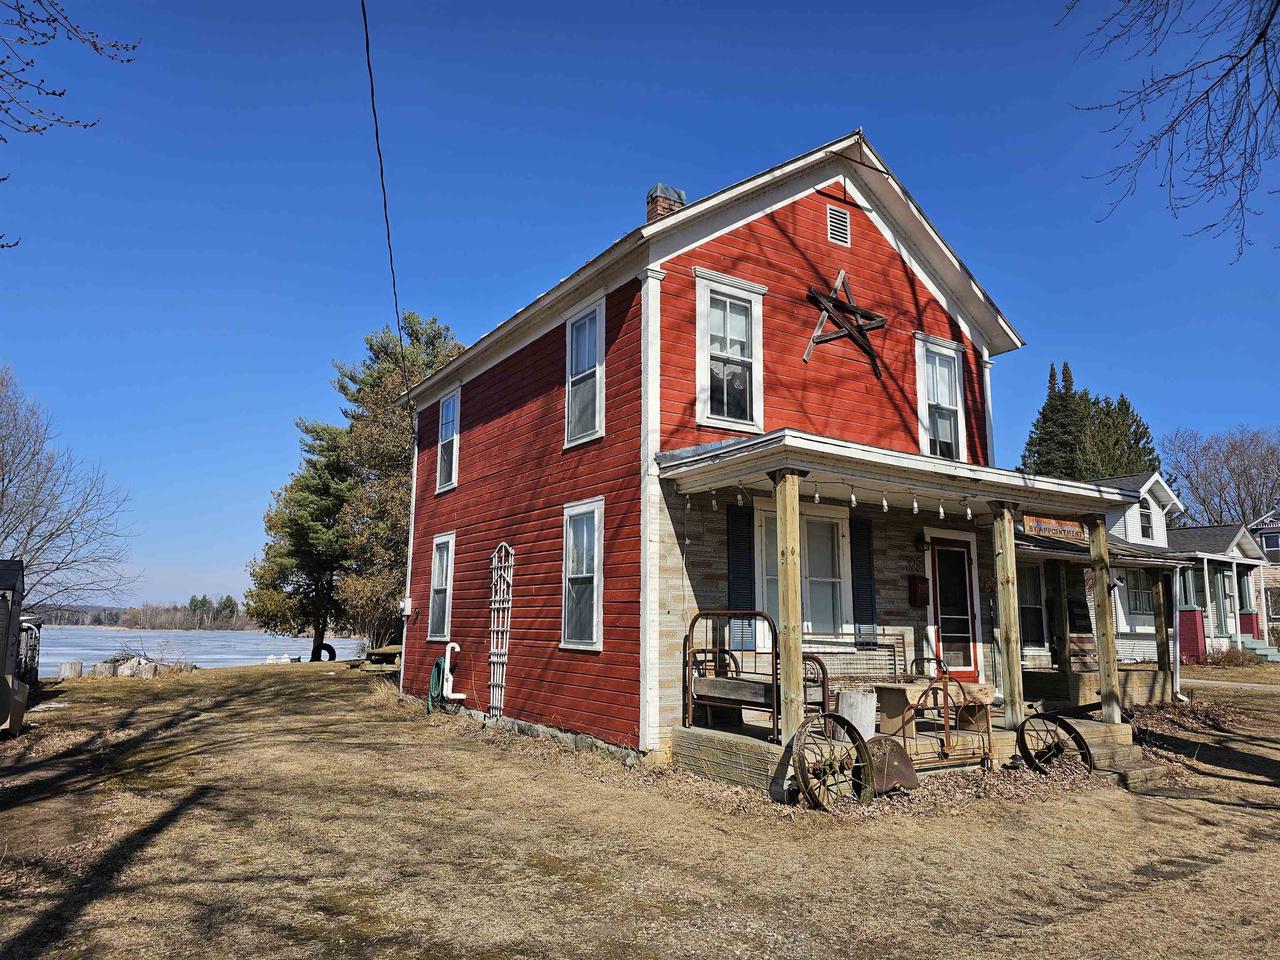 Listing picture for 325 WATER STREET in Iola